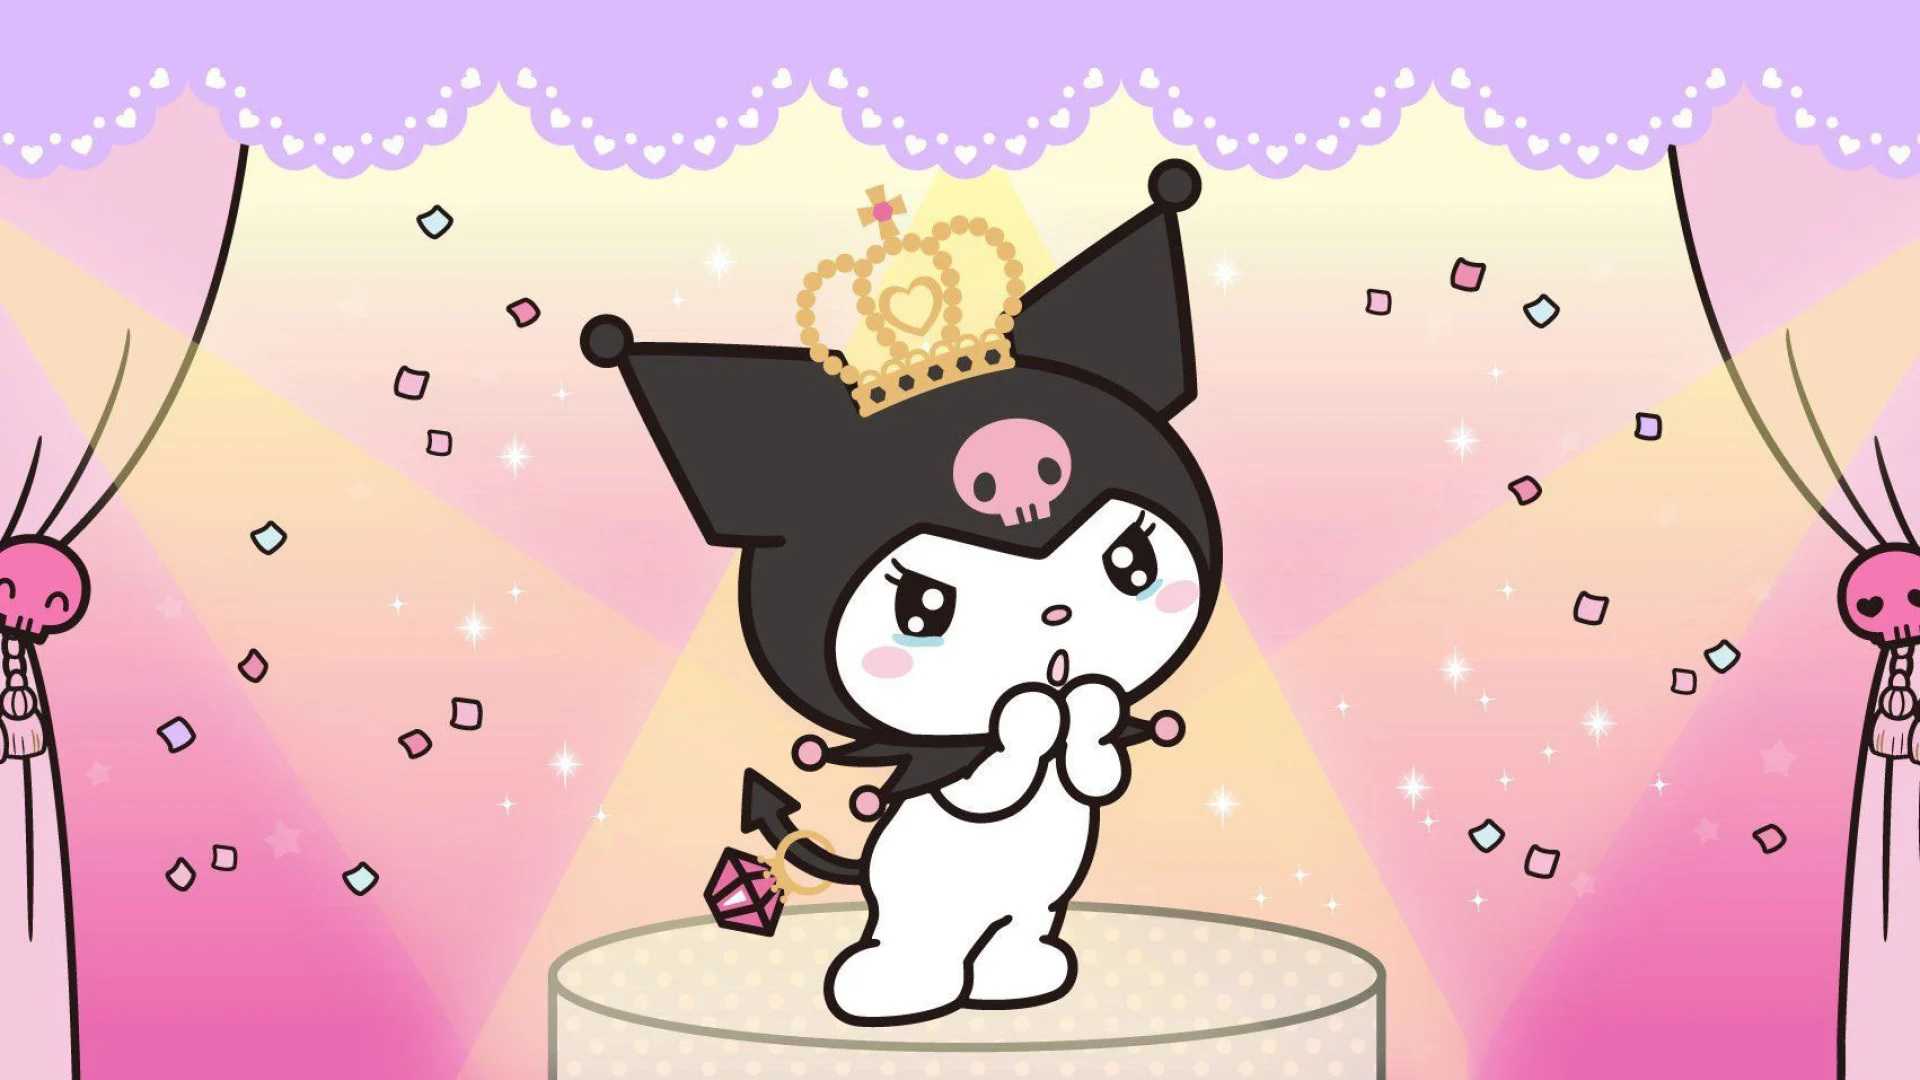 Kuromi is a black cat with a pink nose and pink cheeks. She is wearing a pink crown with a golden star on top. She is standing on a white pedestal and has her right hand on her chest and her left hand on her chin. She is looking up at the sky with a smile on her face. - Kuromi